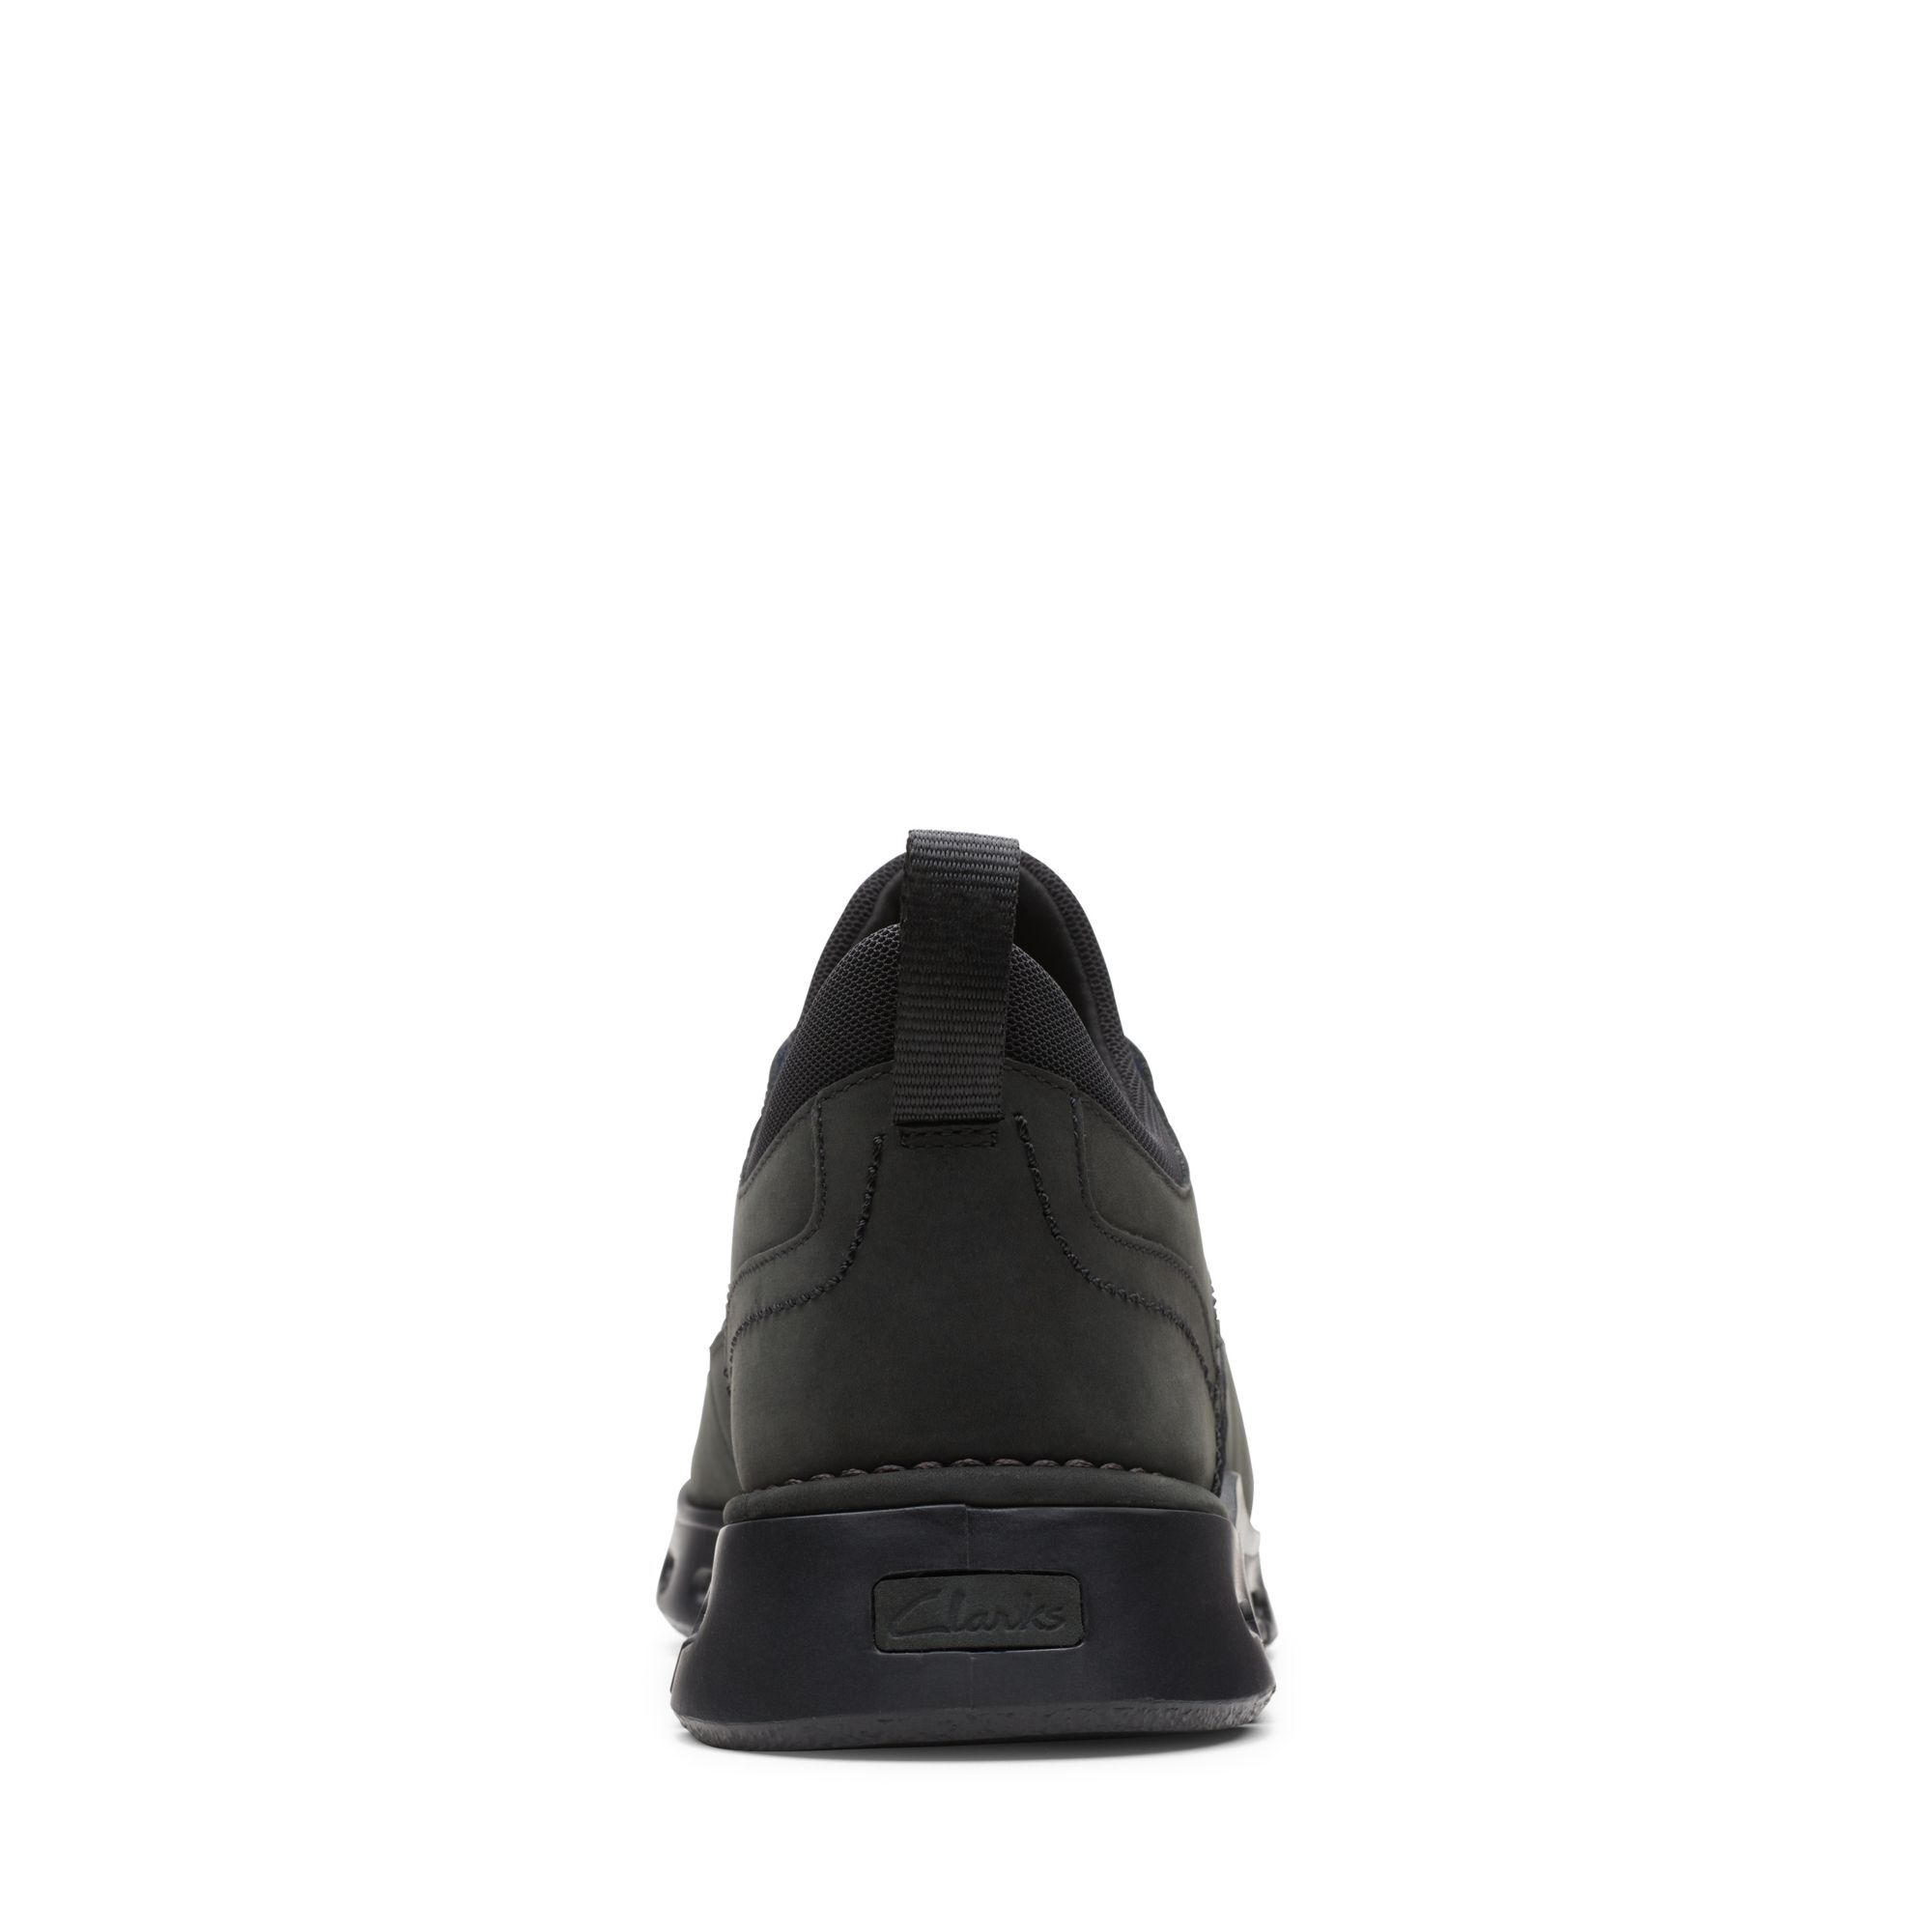 Clarks Nature X Two - Black Nubuck leather